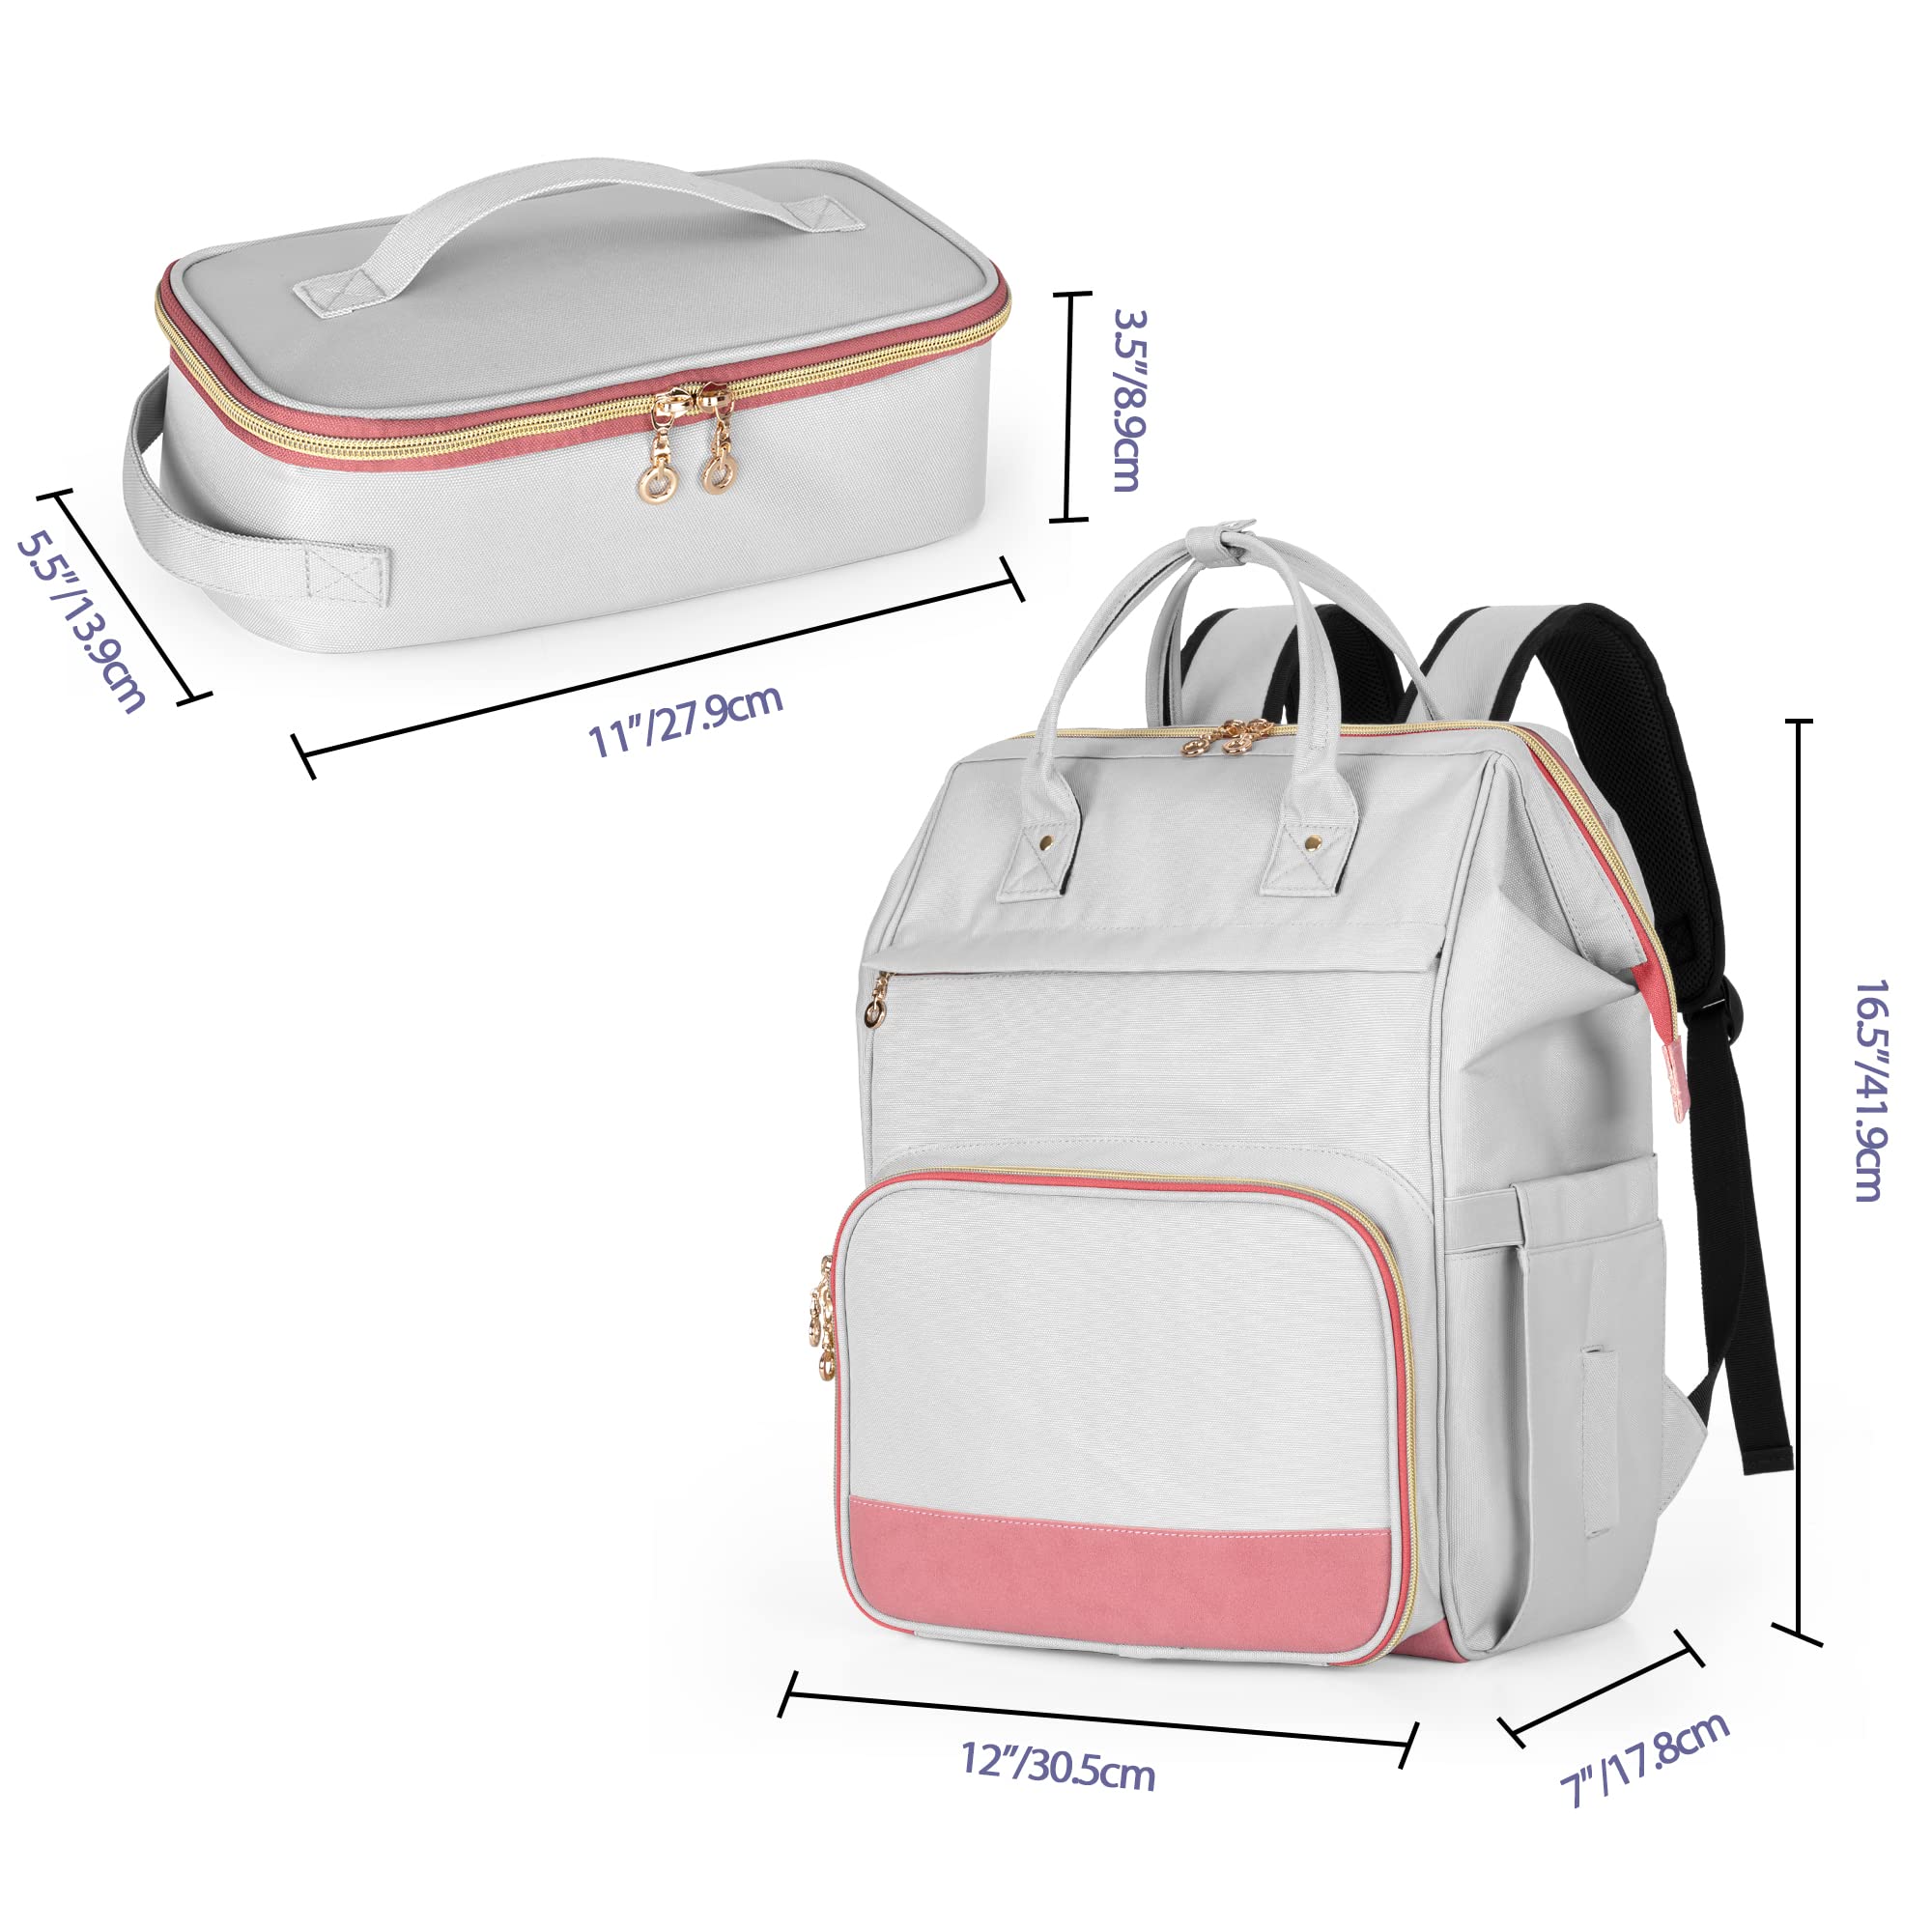 Damero Wearable Breast Pump Bag and Wearable Breast Pump Backpack with Cooler Compatible with Elvie and Willow Breast Pump Bundle